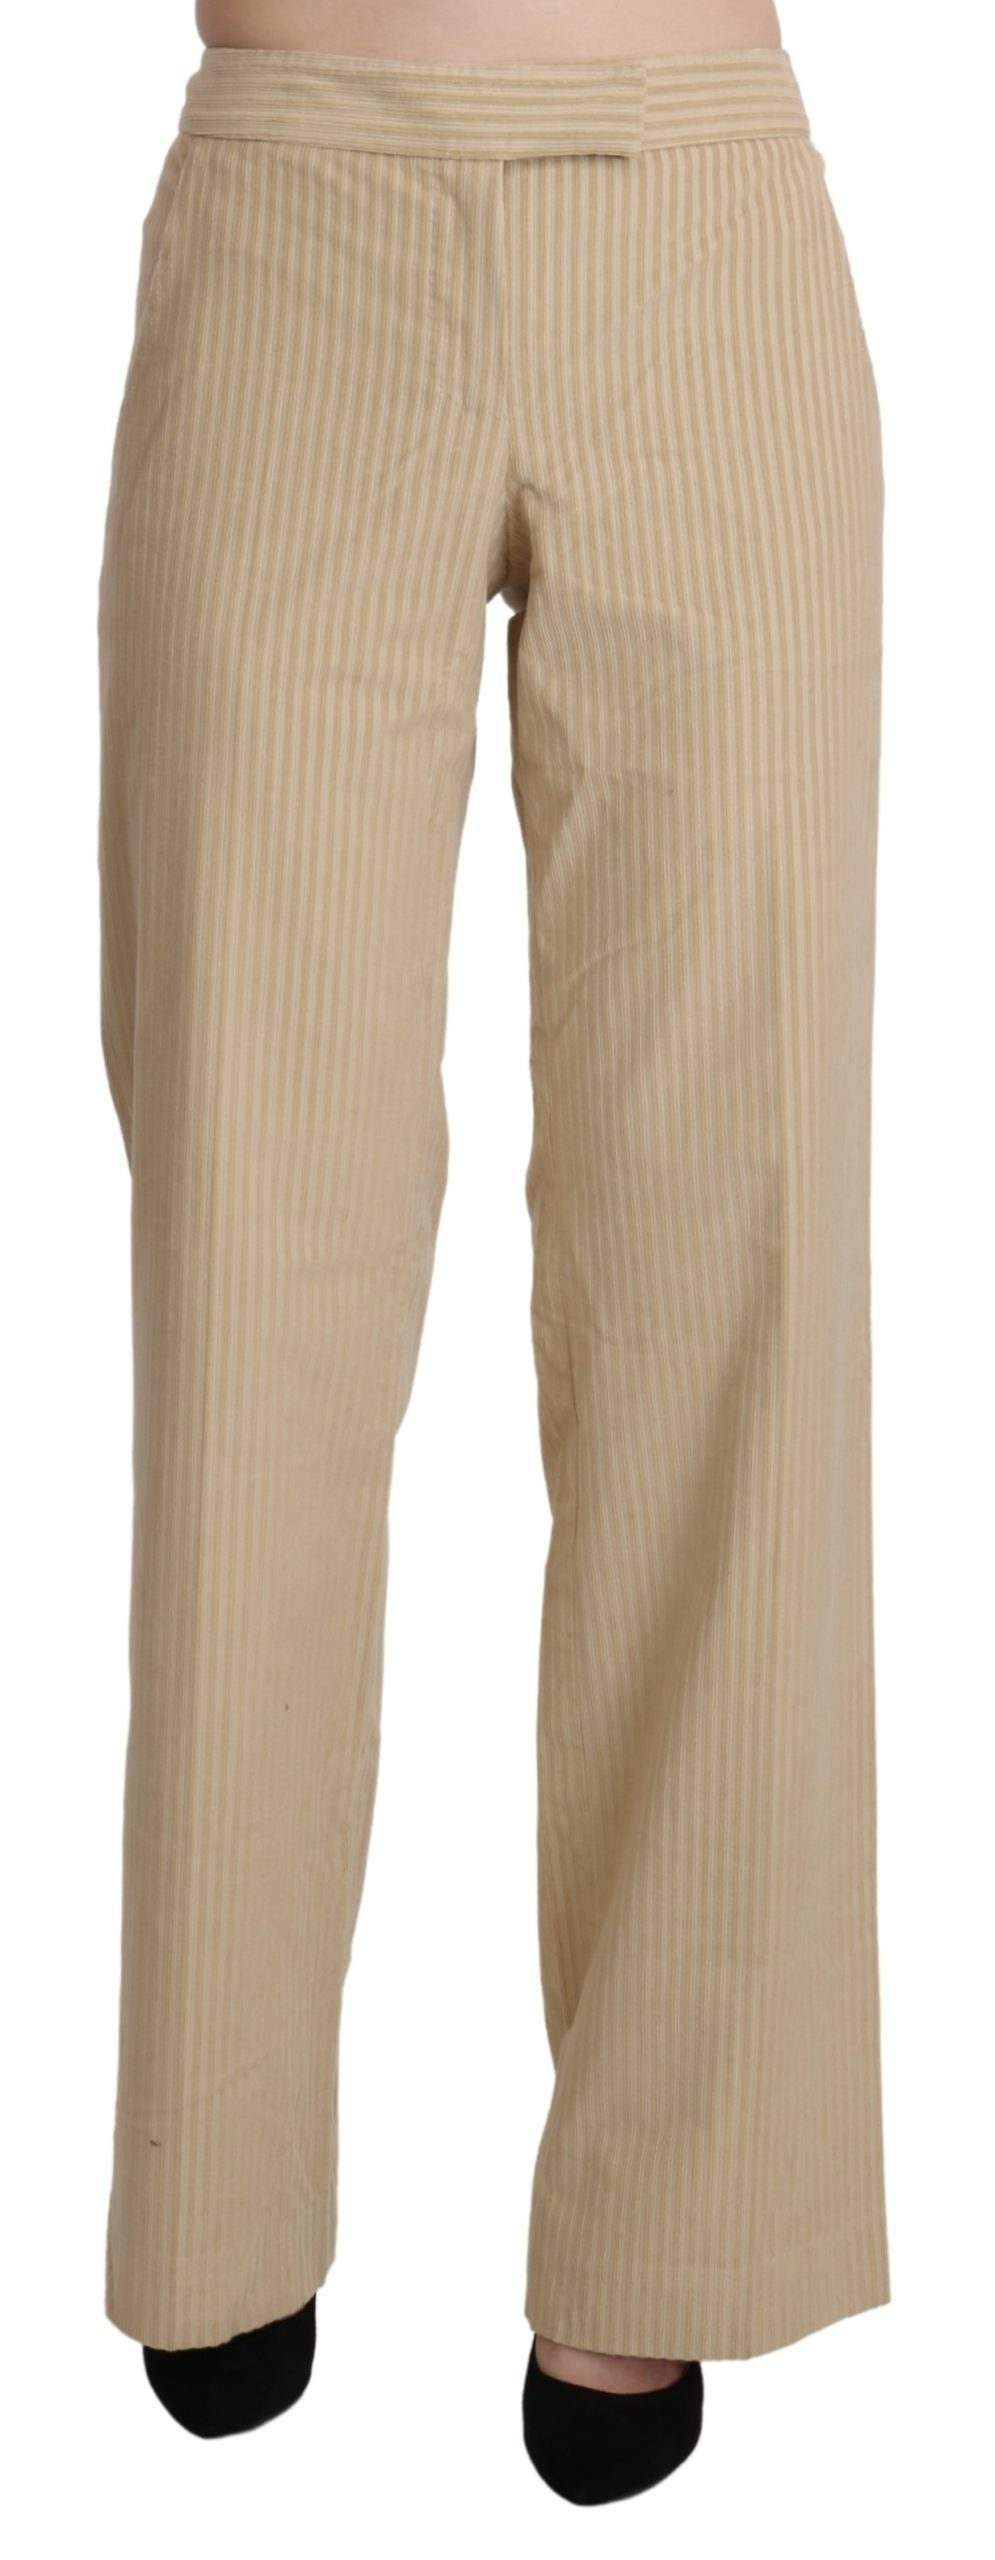 Ermanno Scervino Beige High Waist Flared Wide Leg Trouser Pants #women, Beige, Ermanno Scervino, feed-agegroup-adult, feed-color-beige, feed-gender-female, feed-size-IT44|L, feed-size-IT46|XL, Gender_Women, IT44|L, IT46|XL, Jeans & Pants - Women - Clothing, Women - New Arrivals at SEYMAYKA